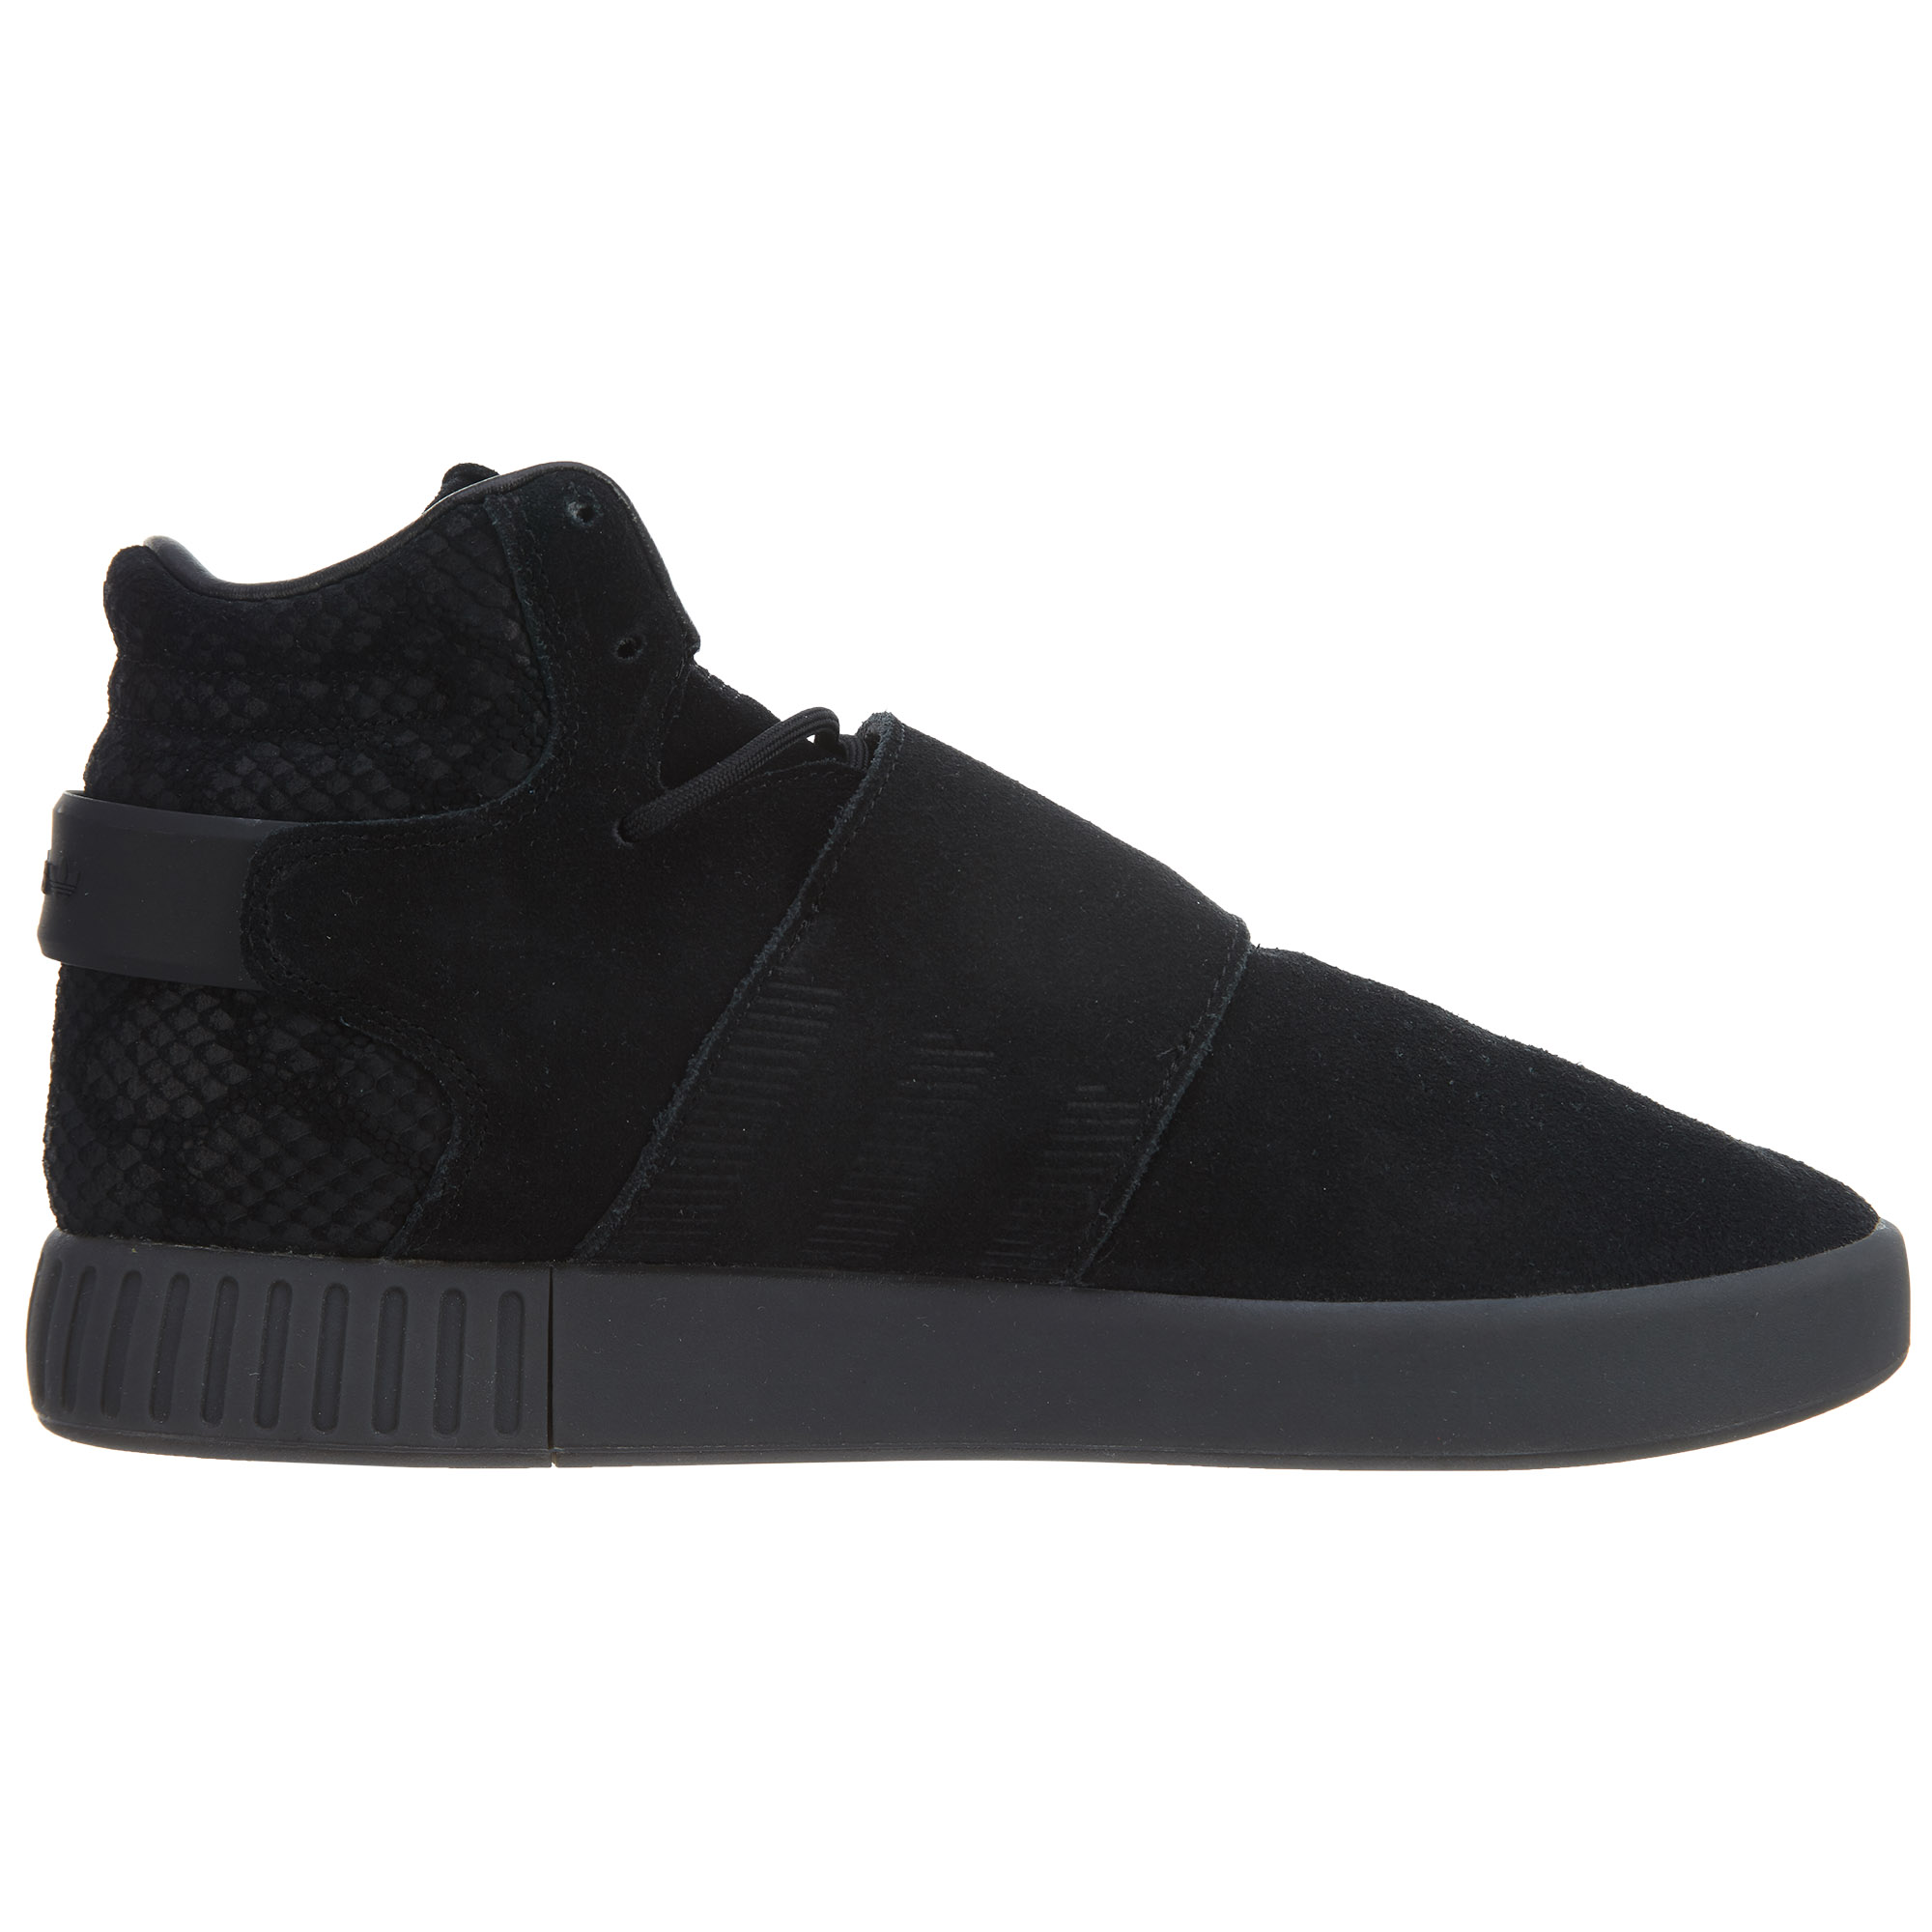 adidas tubular invader strap price in south africa